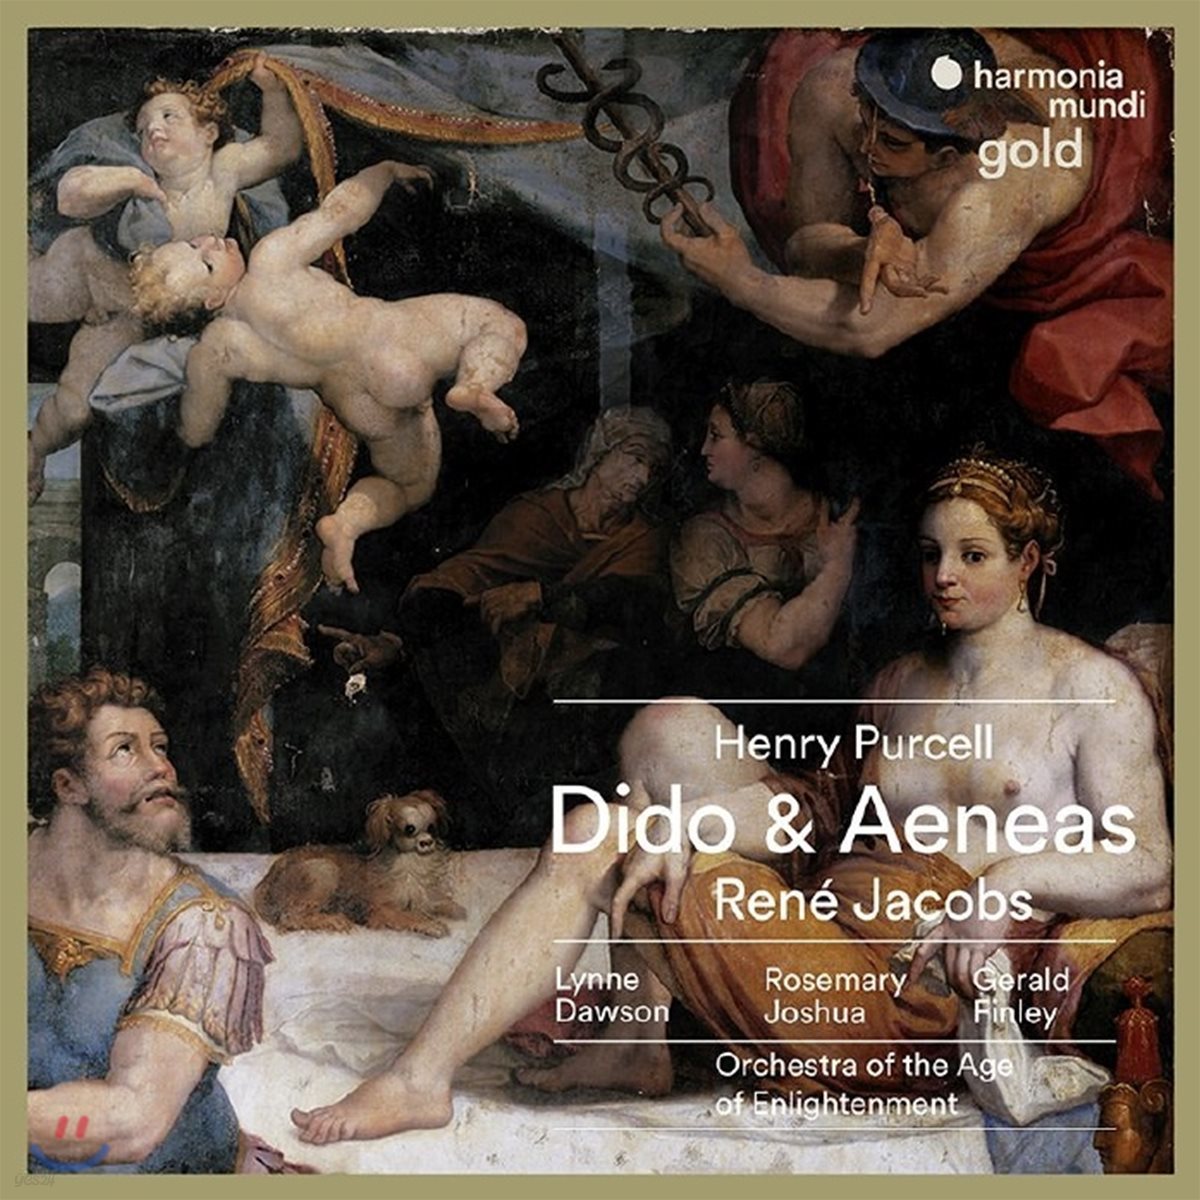 Rene Jacobs 퍼셀: 디도와 에네아스 - 르네 야콥스 (Henry Purcell: Dido and Aeneas)